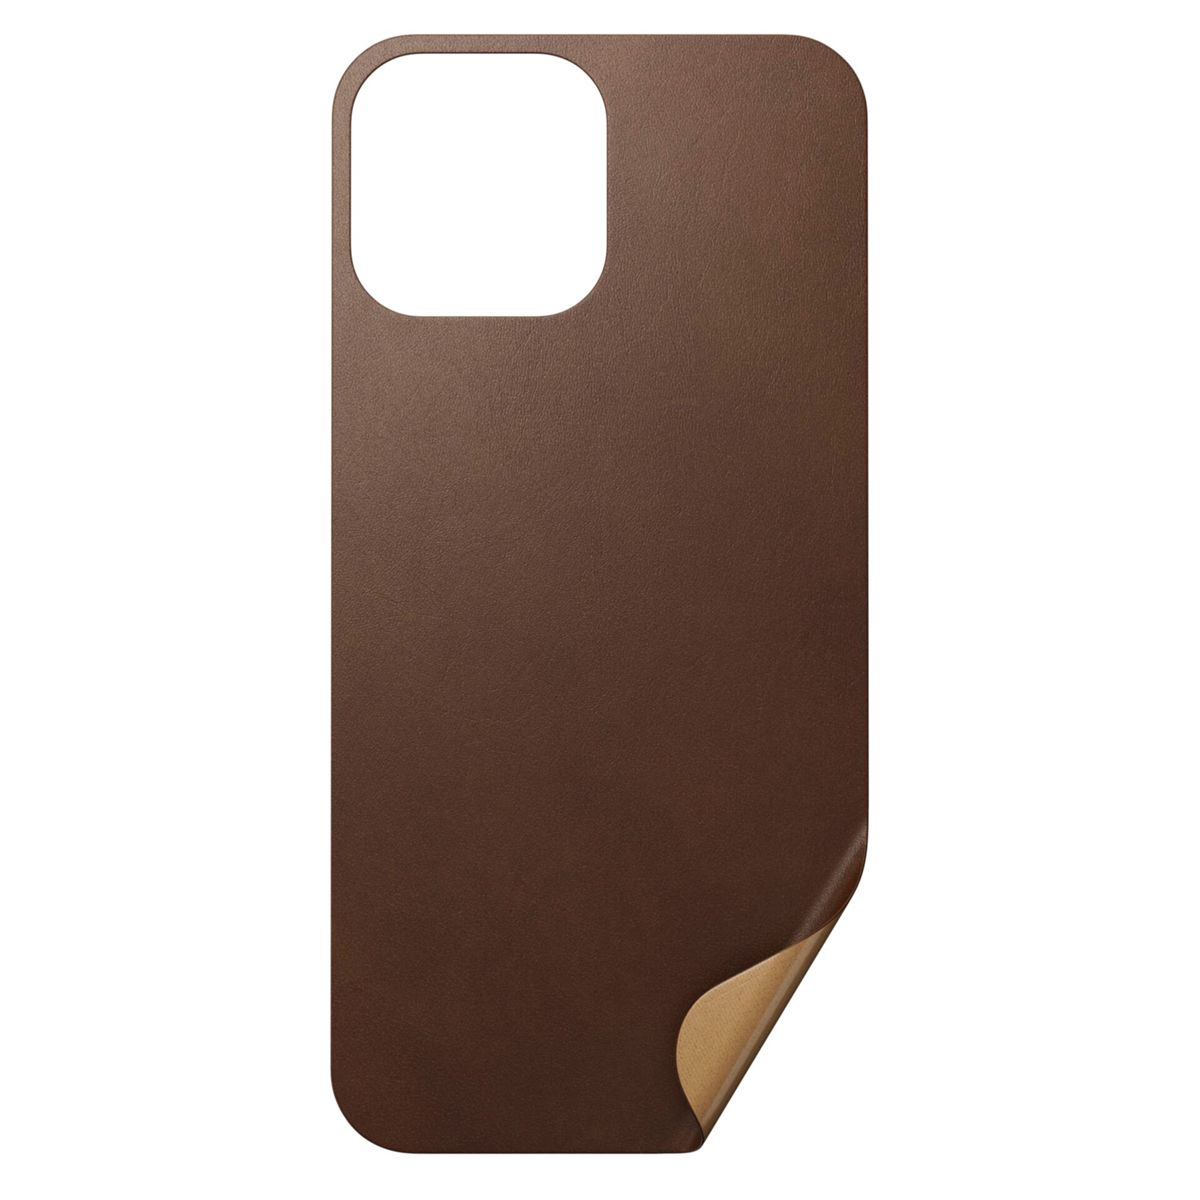 braun NOMAD Backcover, Leather 13 Pro Skin Apple, Brown Rustic Apple, Max, iPhone